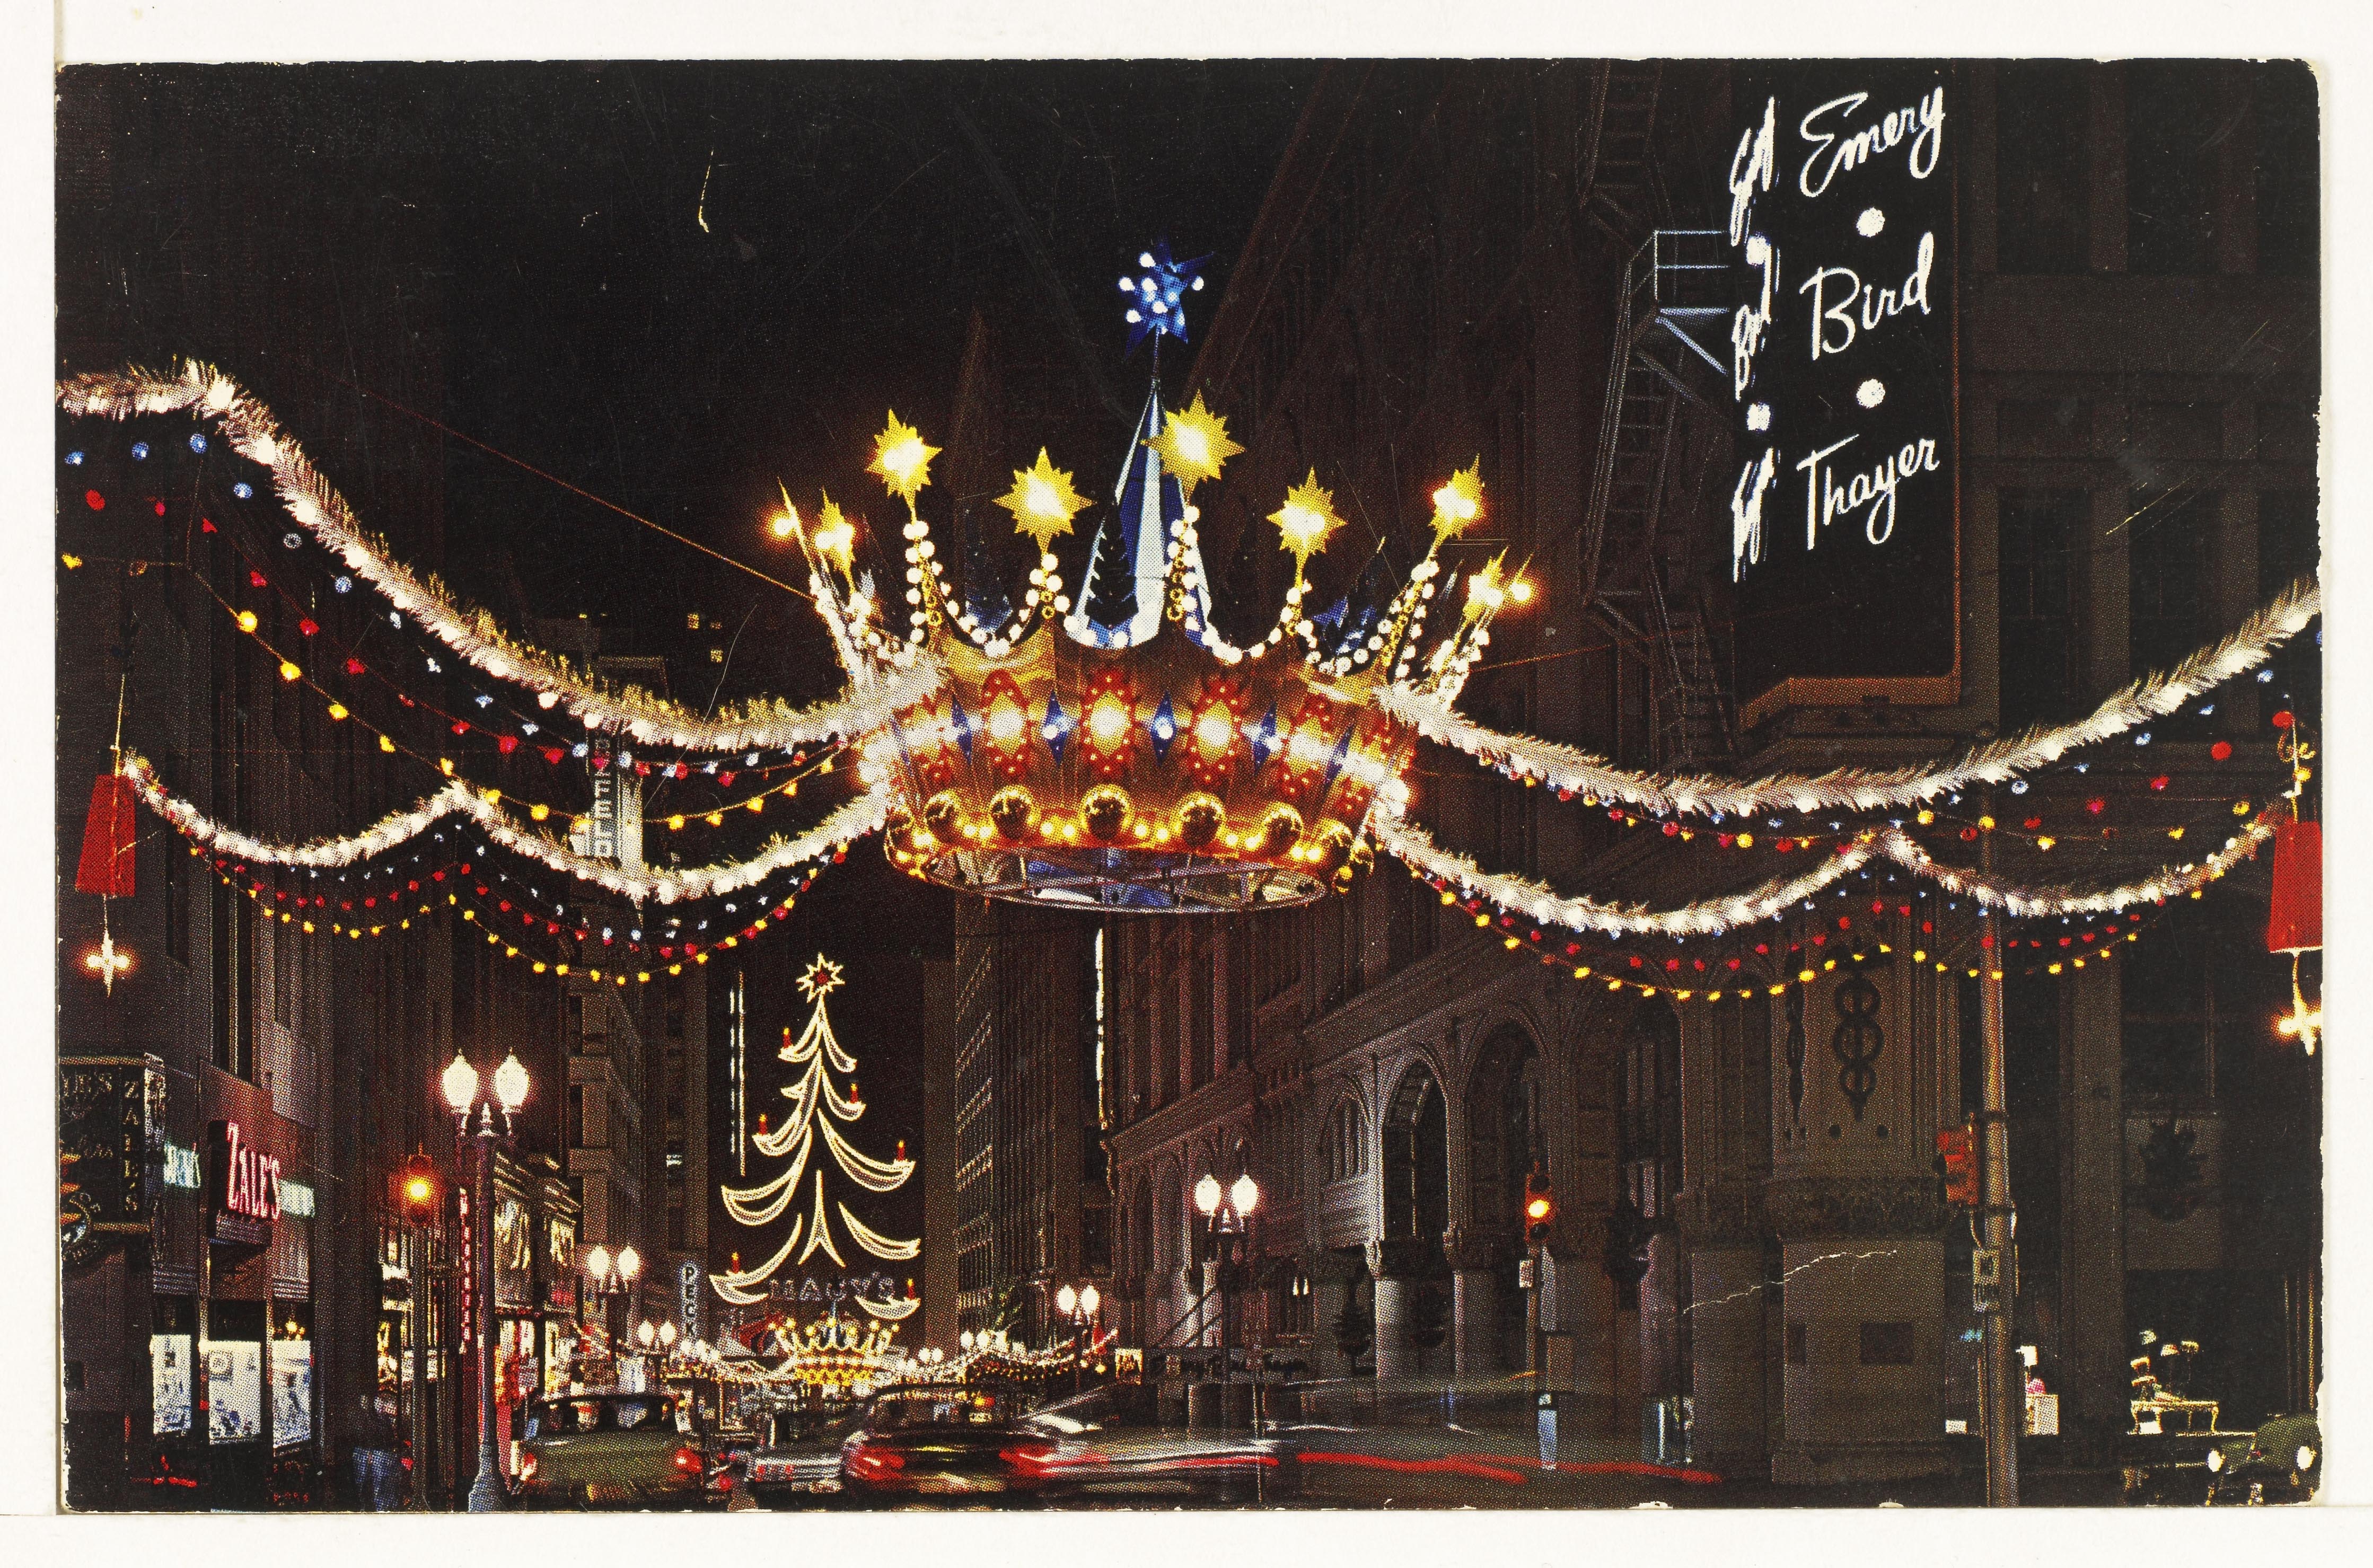 Postcard showing a downtown Christmas crown near the Emery, Bird, and Thayer department store – ca. 1960s